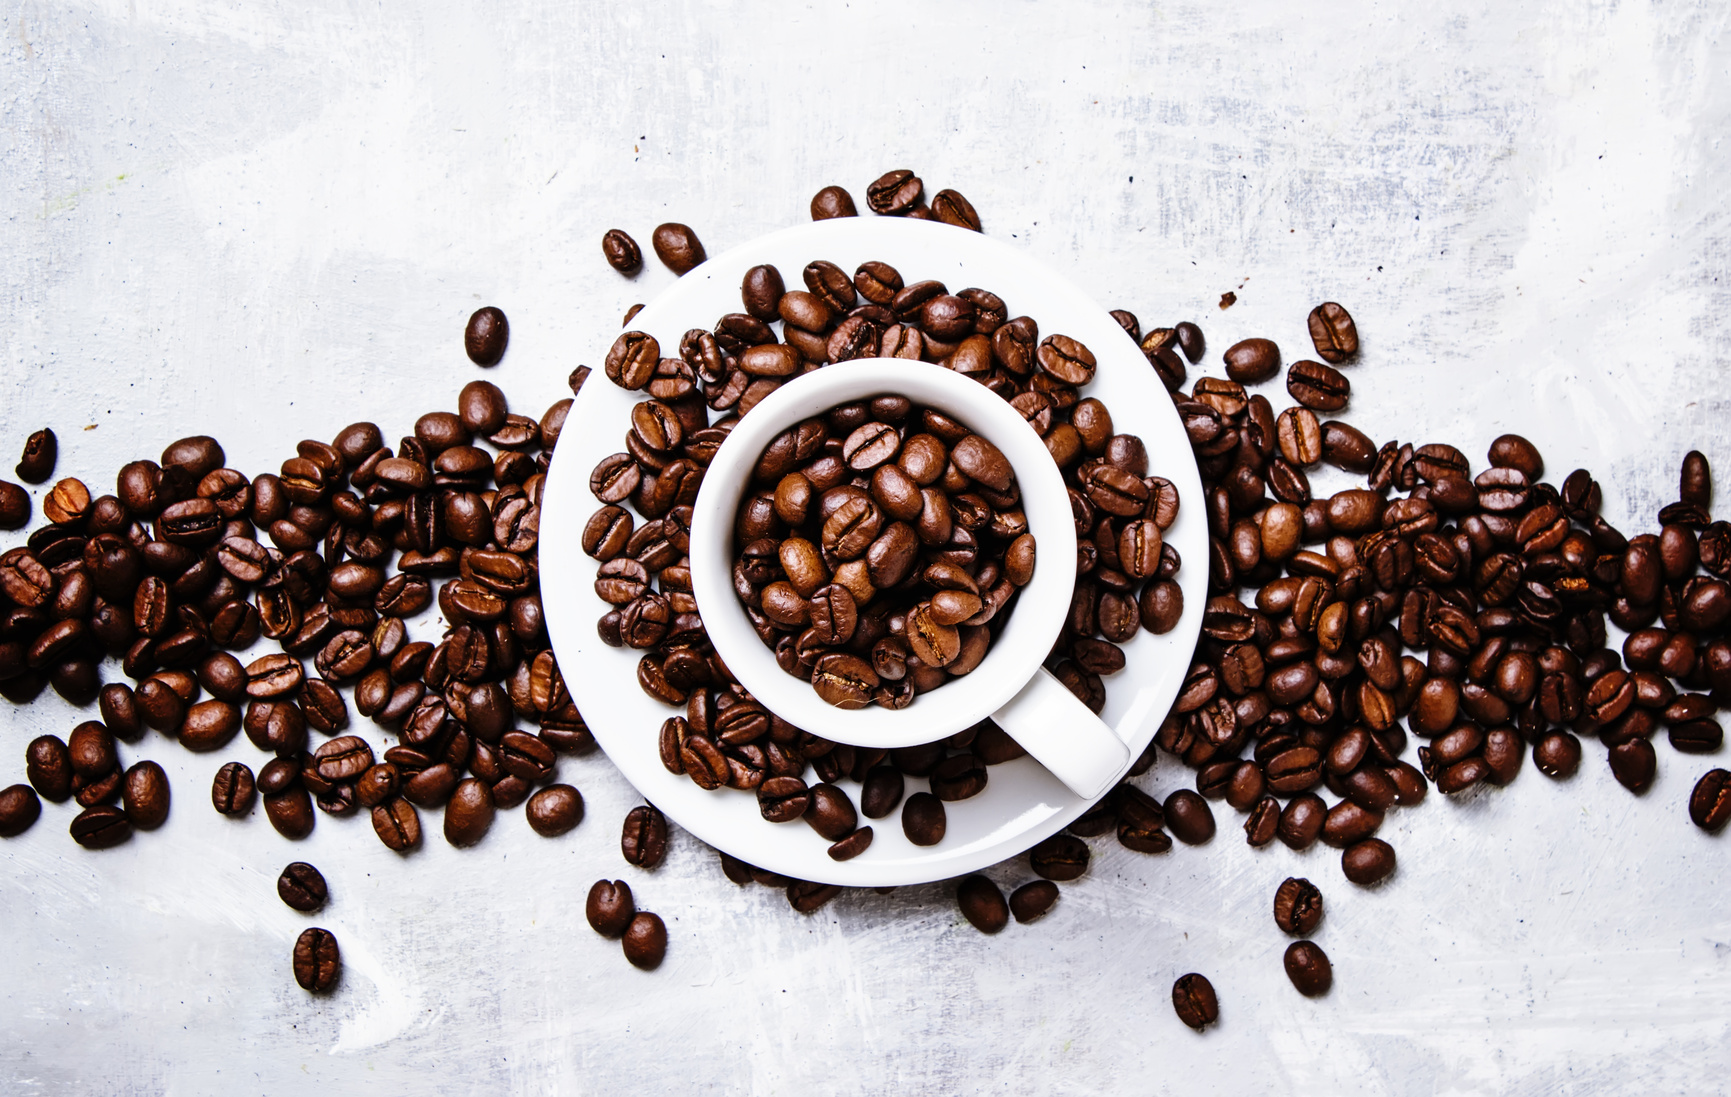 Roasted coffee beans in a white cup and saucer, gray food background, top view, flat lay